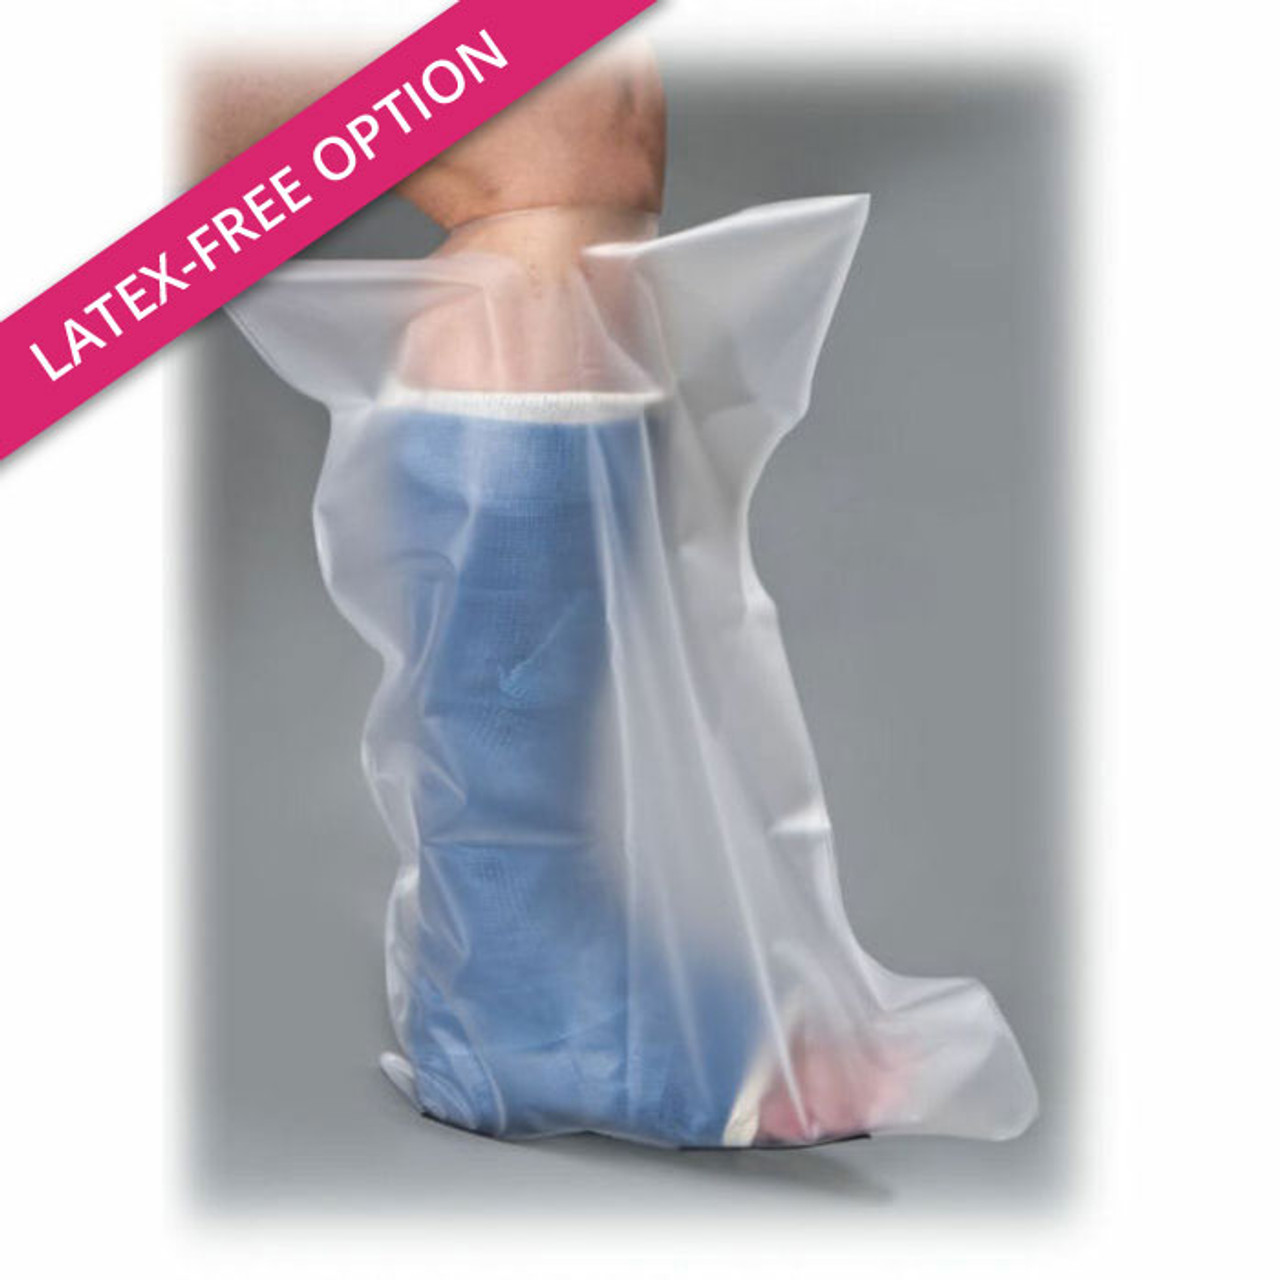 Waterproof PICC Line Cover, Waterproof Cast Cover, Cast Protector